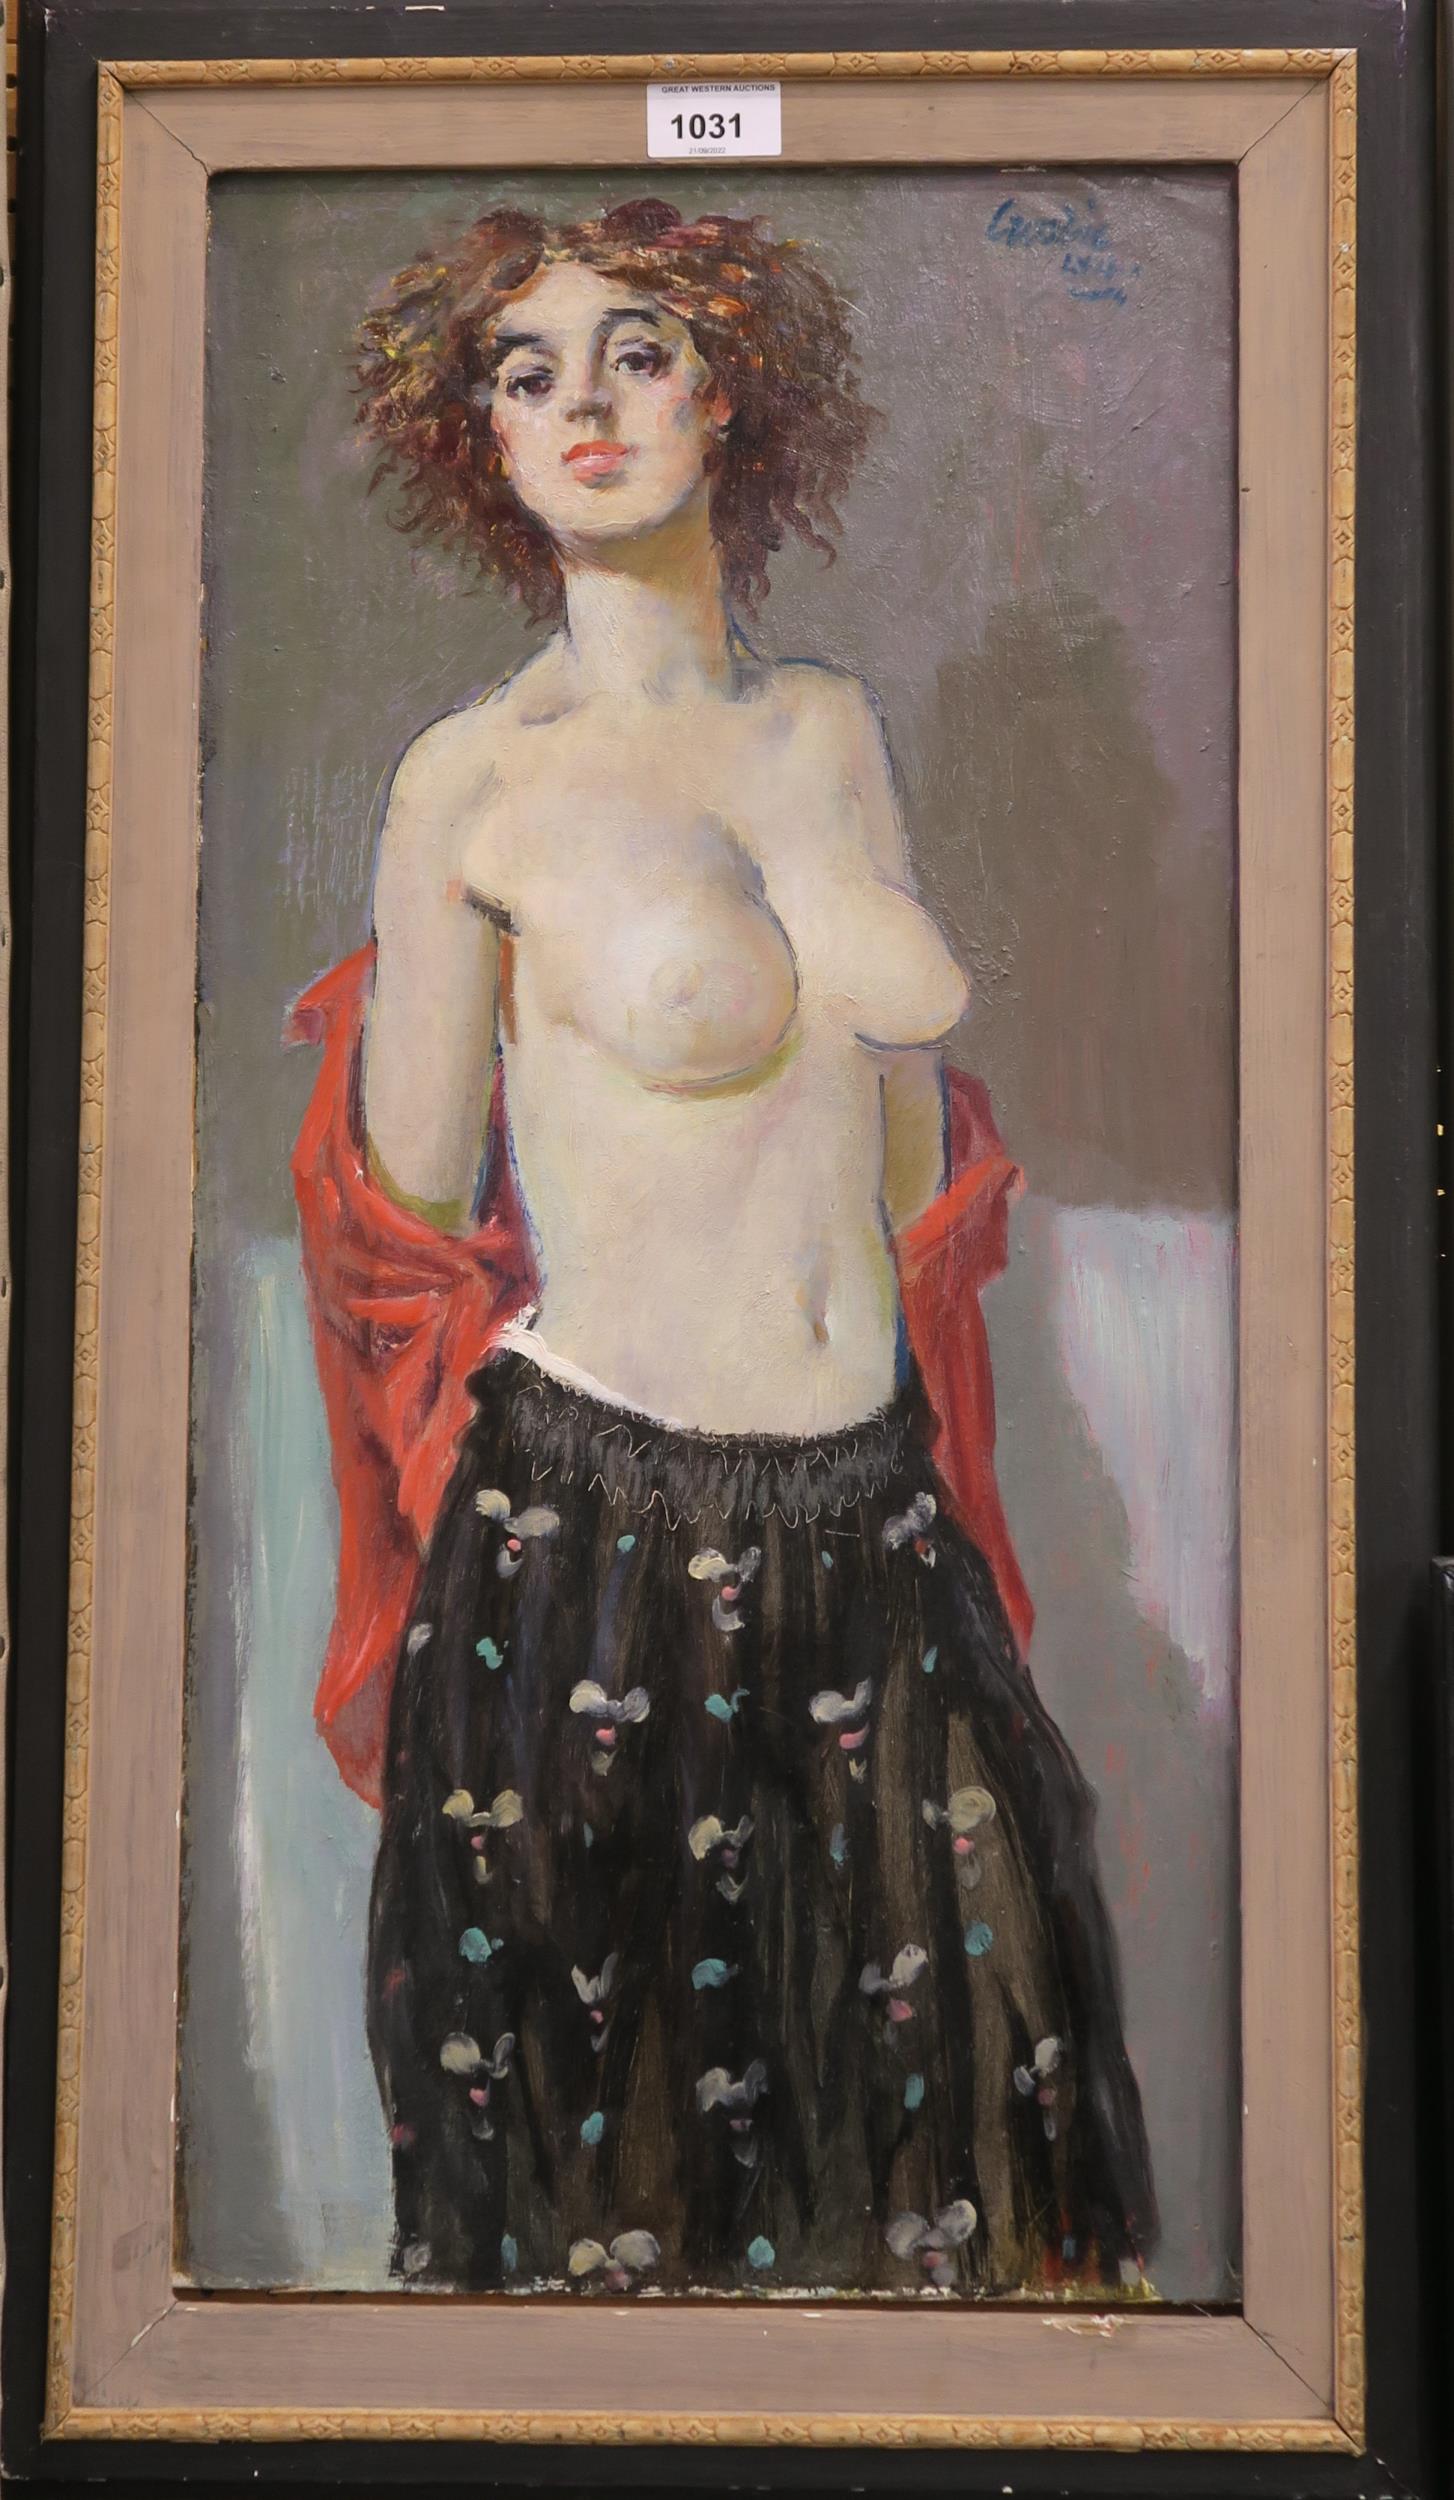 WILLIAM CROSBIE RSA RGI (1915-1999) FEMALE REMOVING BLOUSE  Oil on board, signed upper right, 60 x - Image 2 of 3